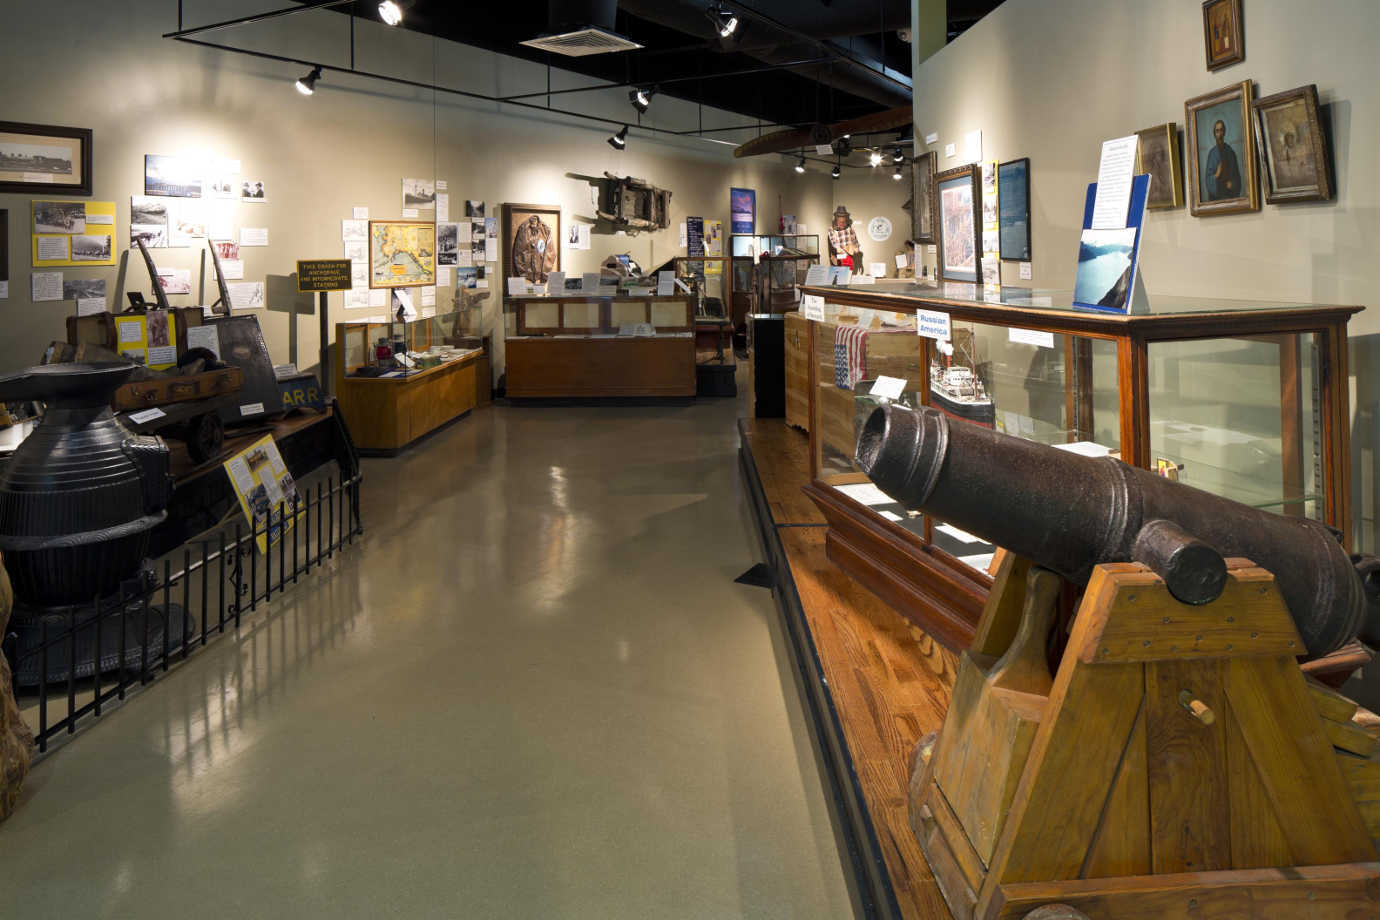 In the first floor museum, visitors can research area history, watch documentary films, and explore exhibitions. Image courtesy of the Seward Community Library & Museum.